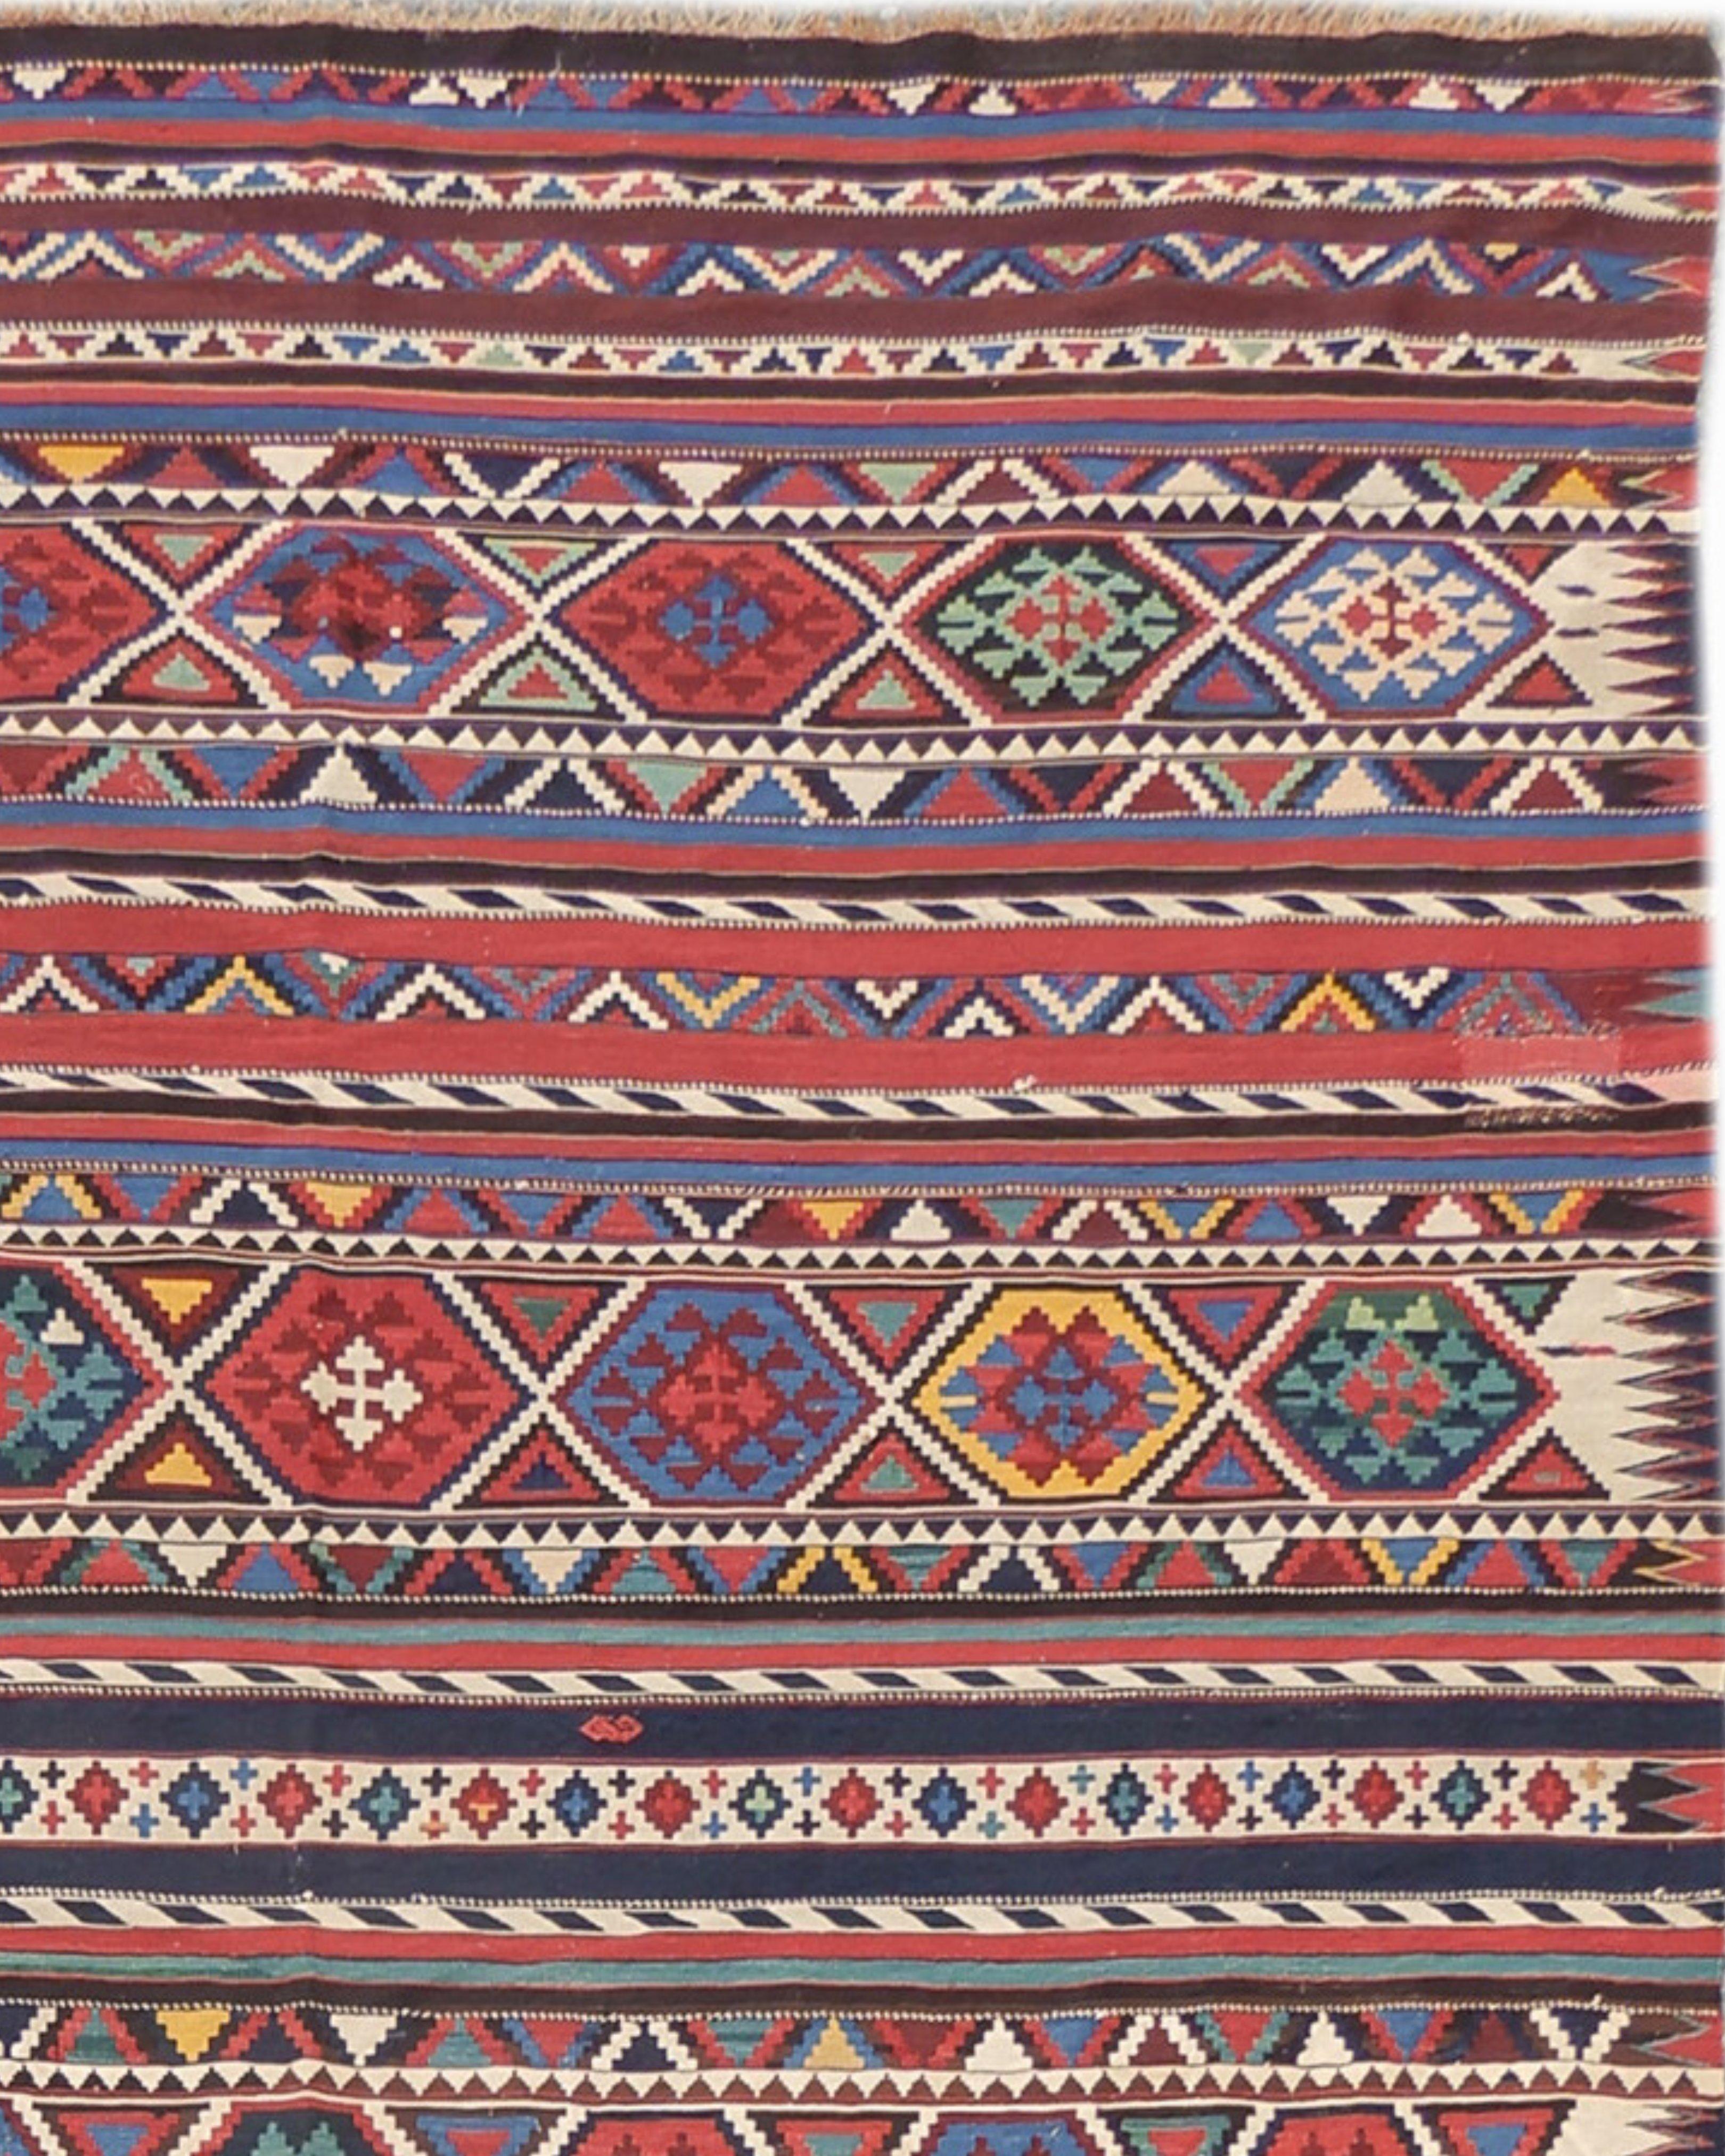 Antique Caucasian Shirvan Kilim Rug, Late 19th Century

This Caucasian Shirvan kilim combines a fine weave with diverse colors incorporating no fewer than three reds and blues each, as well as gold and greens. Rows of graphic latch-hook diamonds are